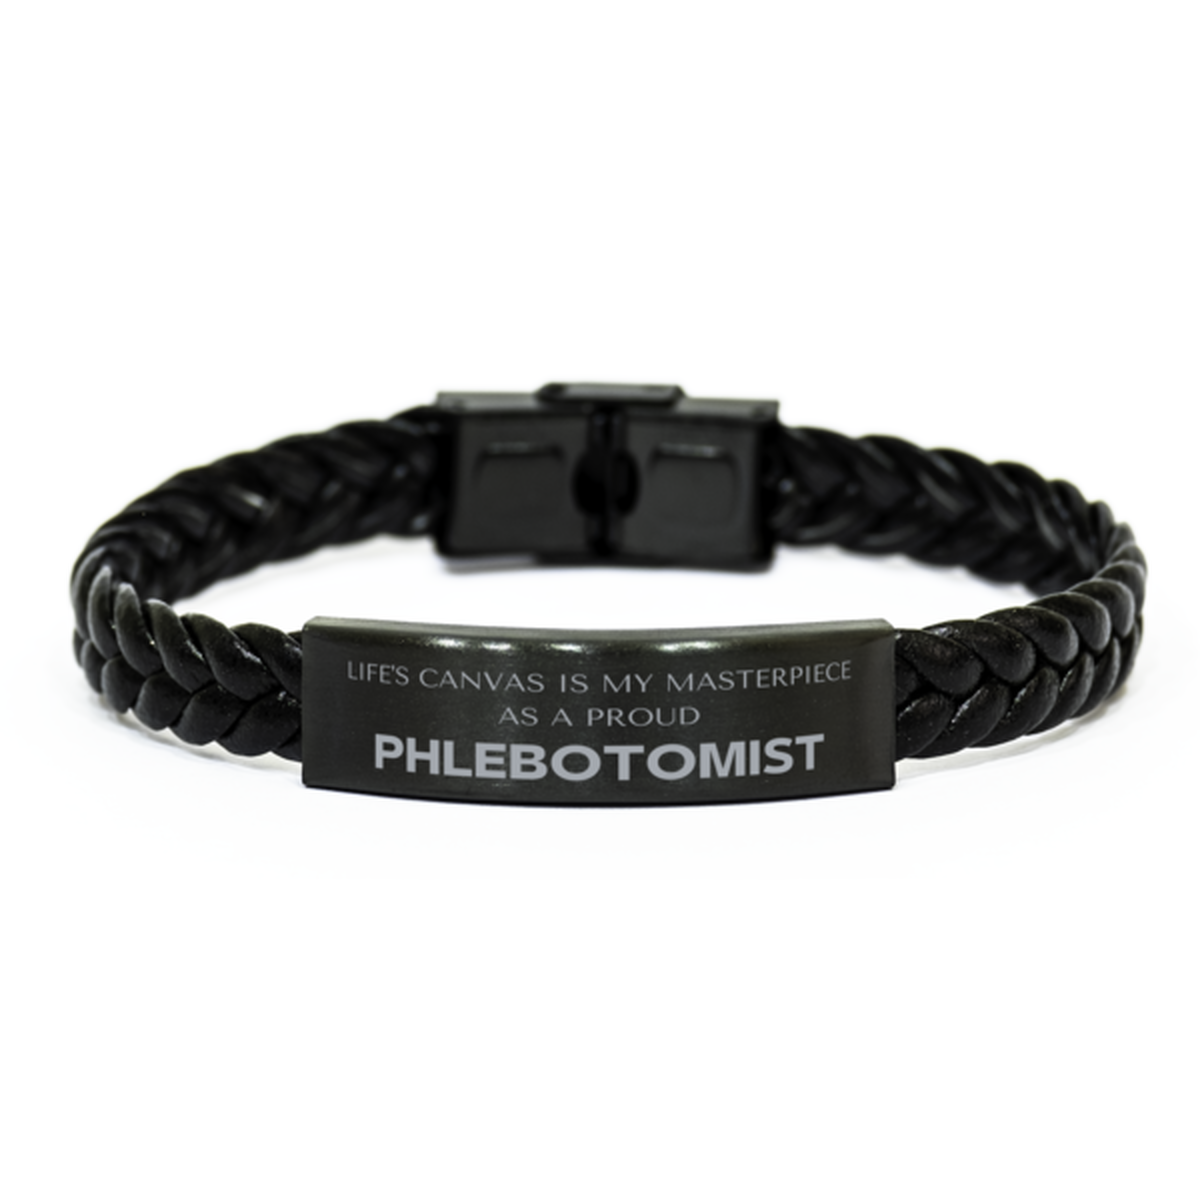 Proud Phlebotomist Gifts, Life's canvas is my masterpiece, Epic Birthday Christmas Unique Braided Leather Bracelet For Phlebotomist, Coworkers, Men, Women, Friends